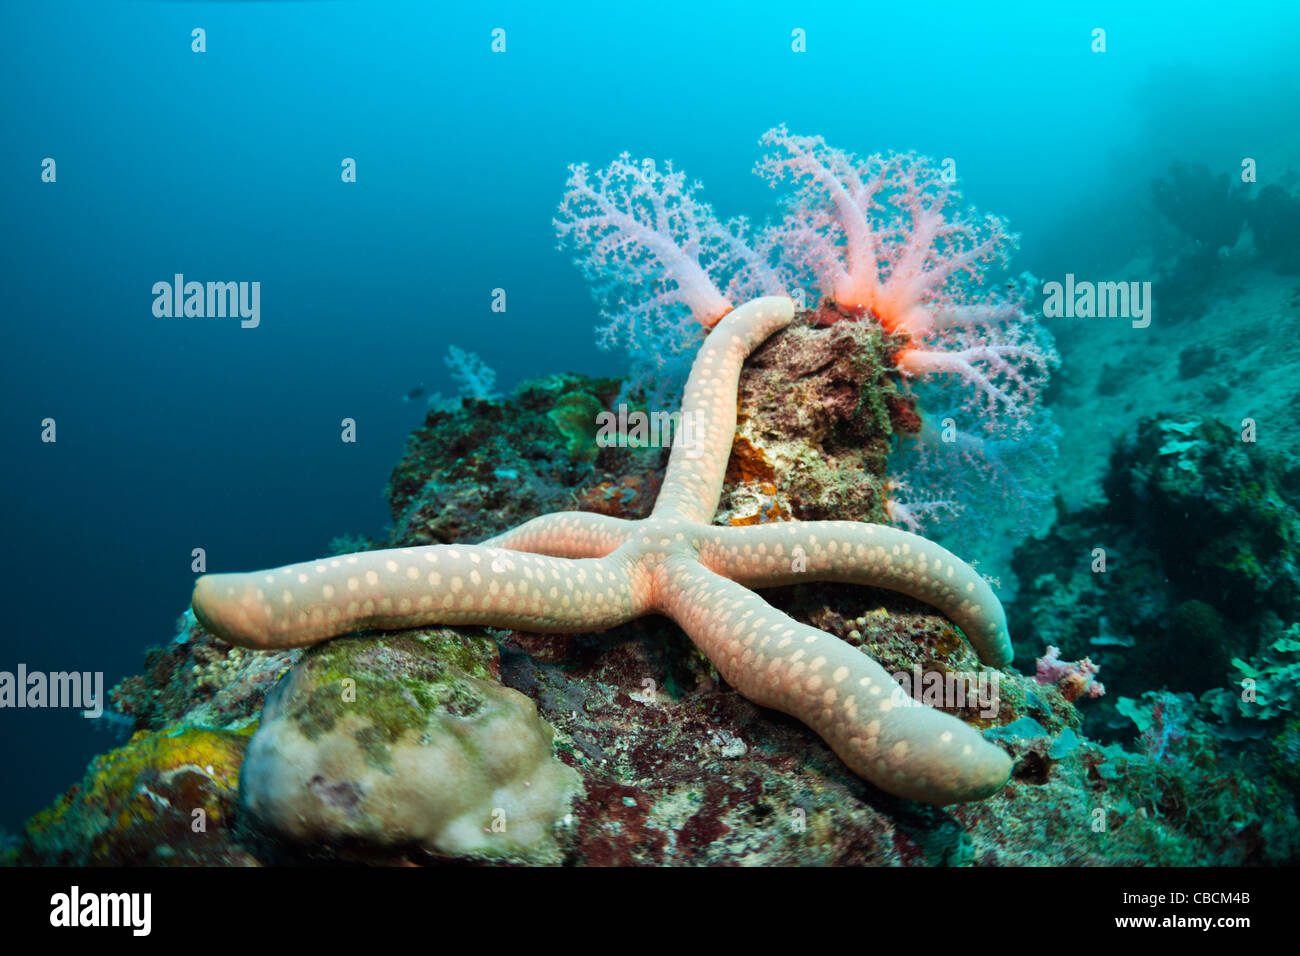 Starfish in Coral Reef, Linckia sp., Cenderawasih Bay, West Papua, Indonesia Stock Photo